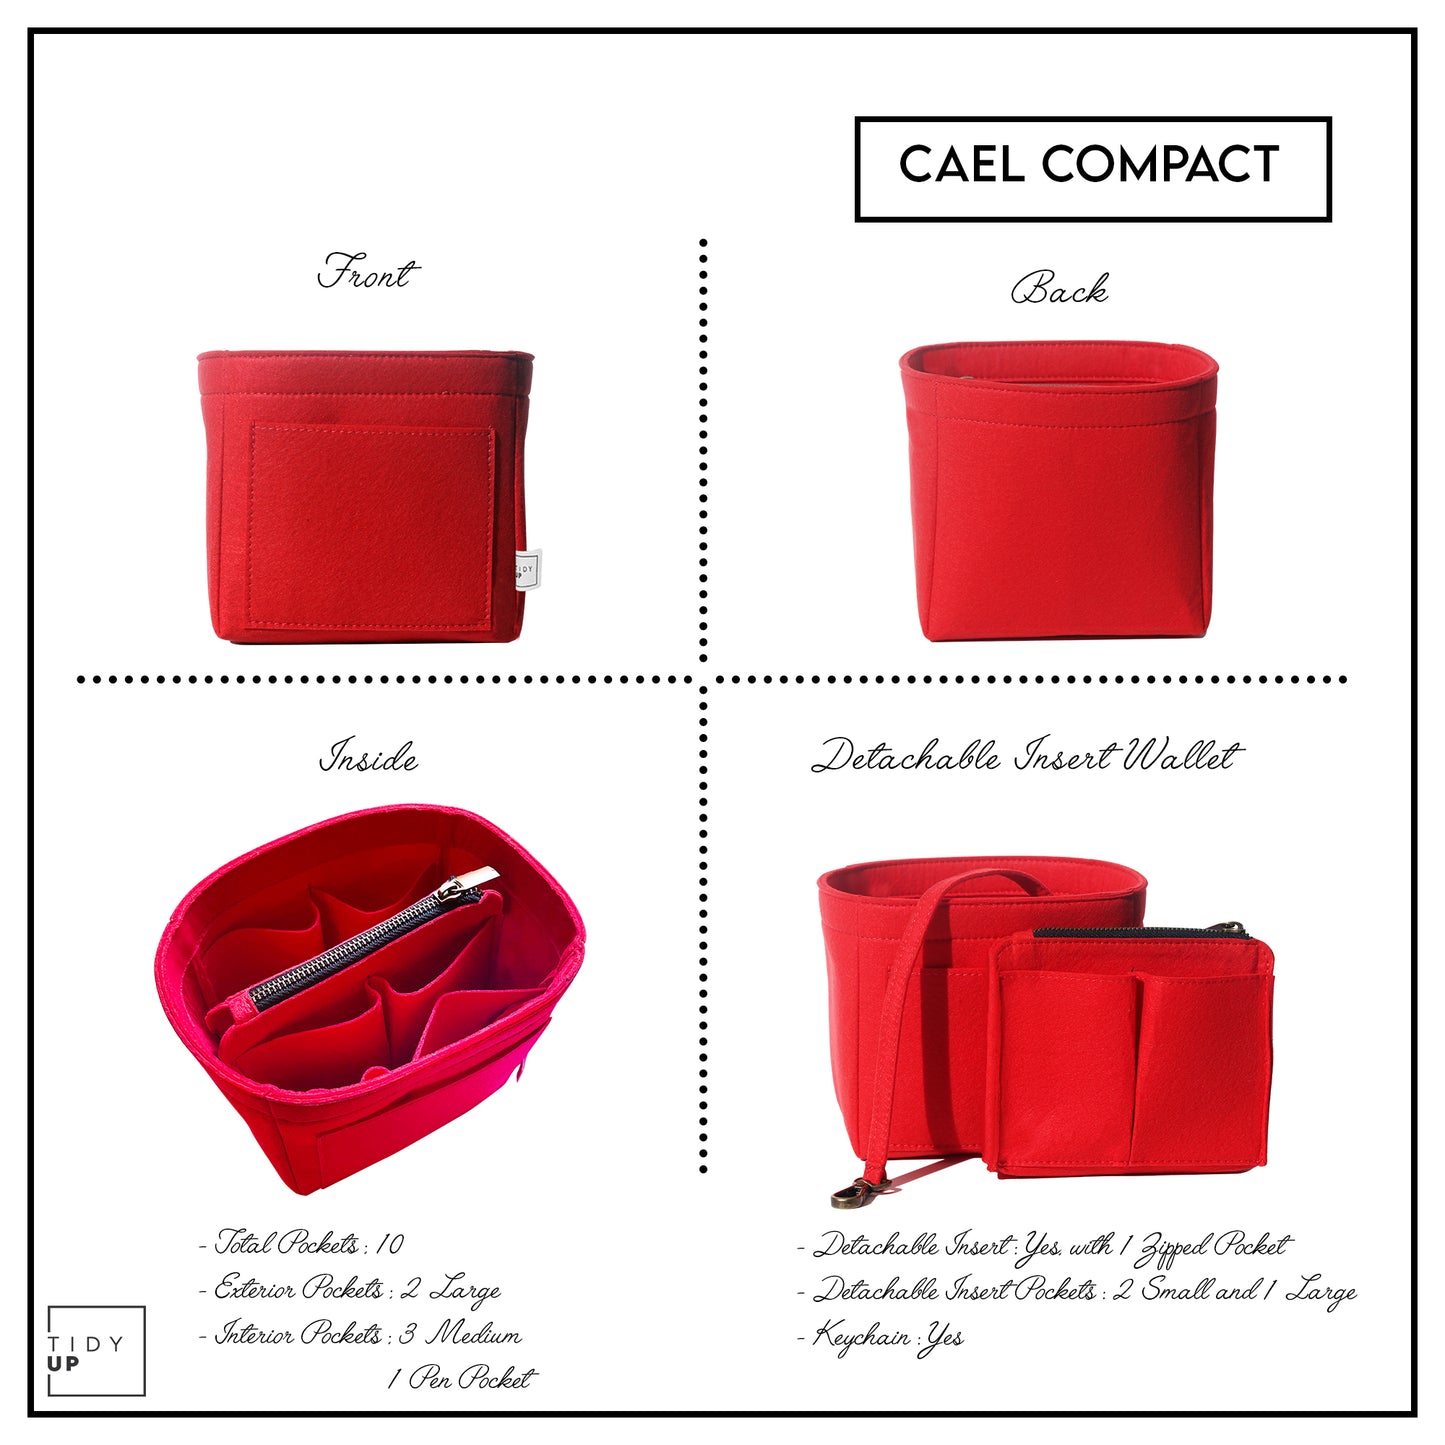 TidyUp's Cael Compact Red Bag Organiser All Sides